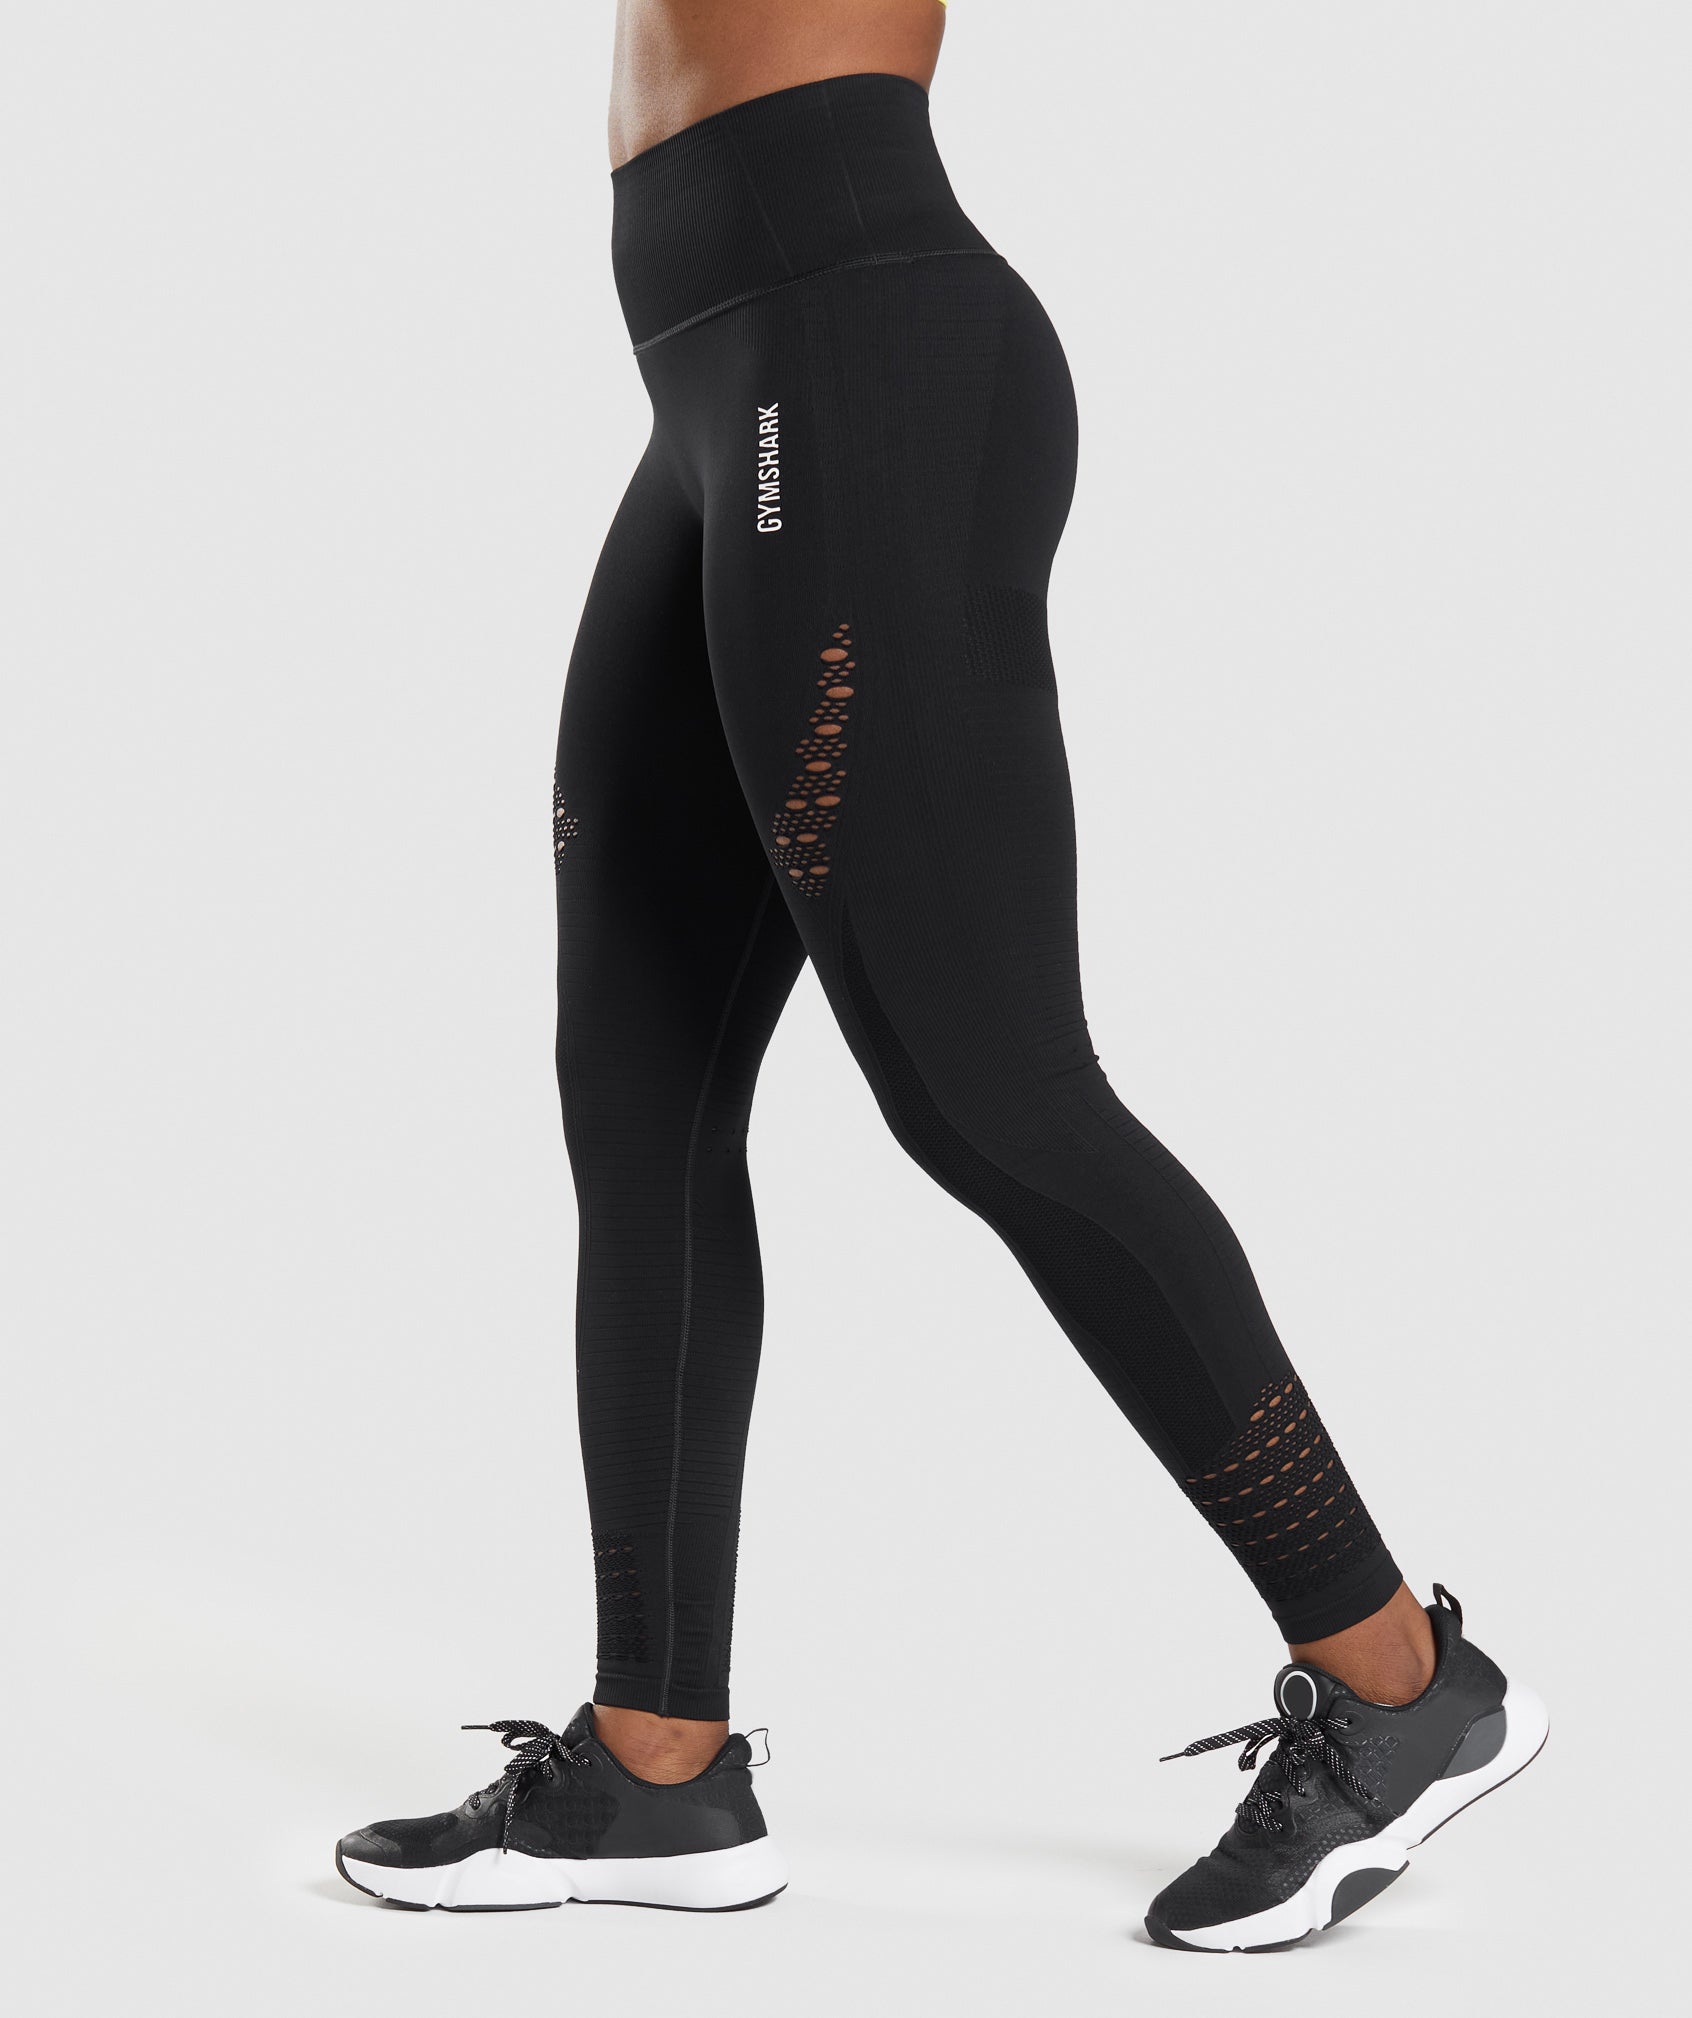 Gymshark NWT Fit Seamless Leggings Small Black - $27 New With Tags - From  Rachael